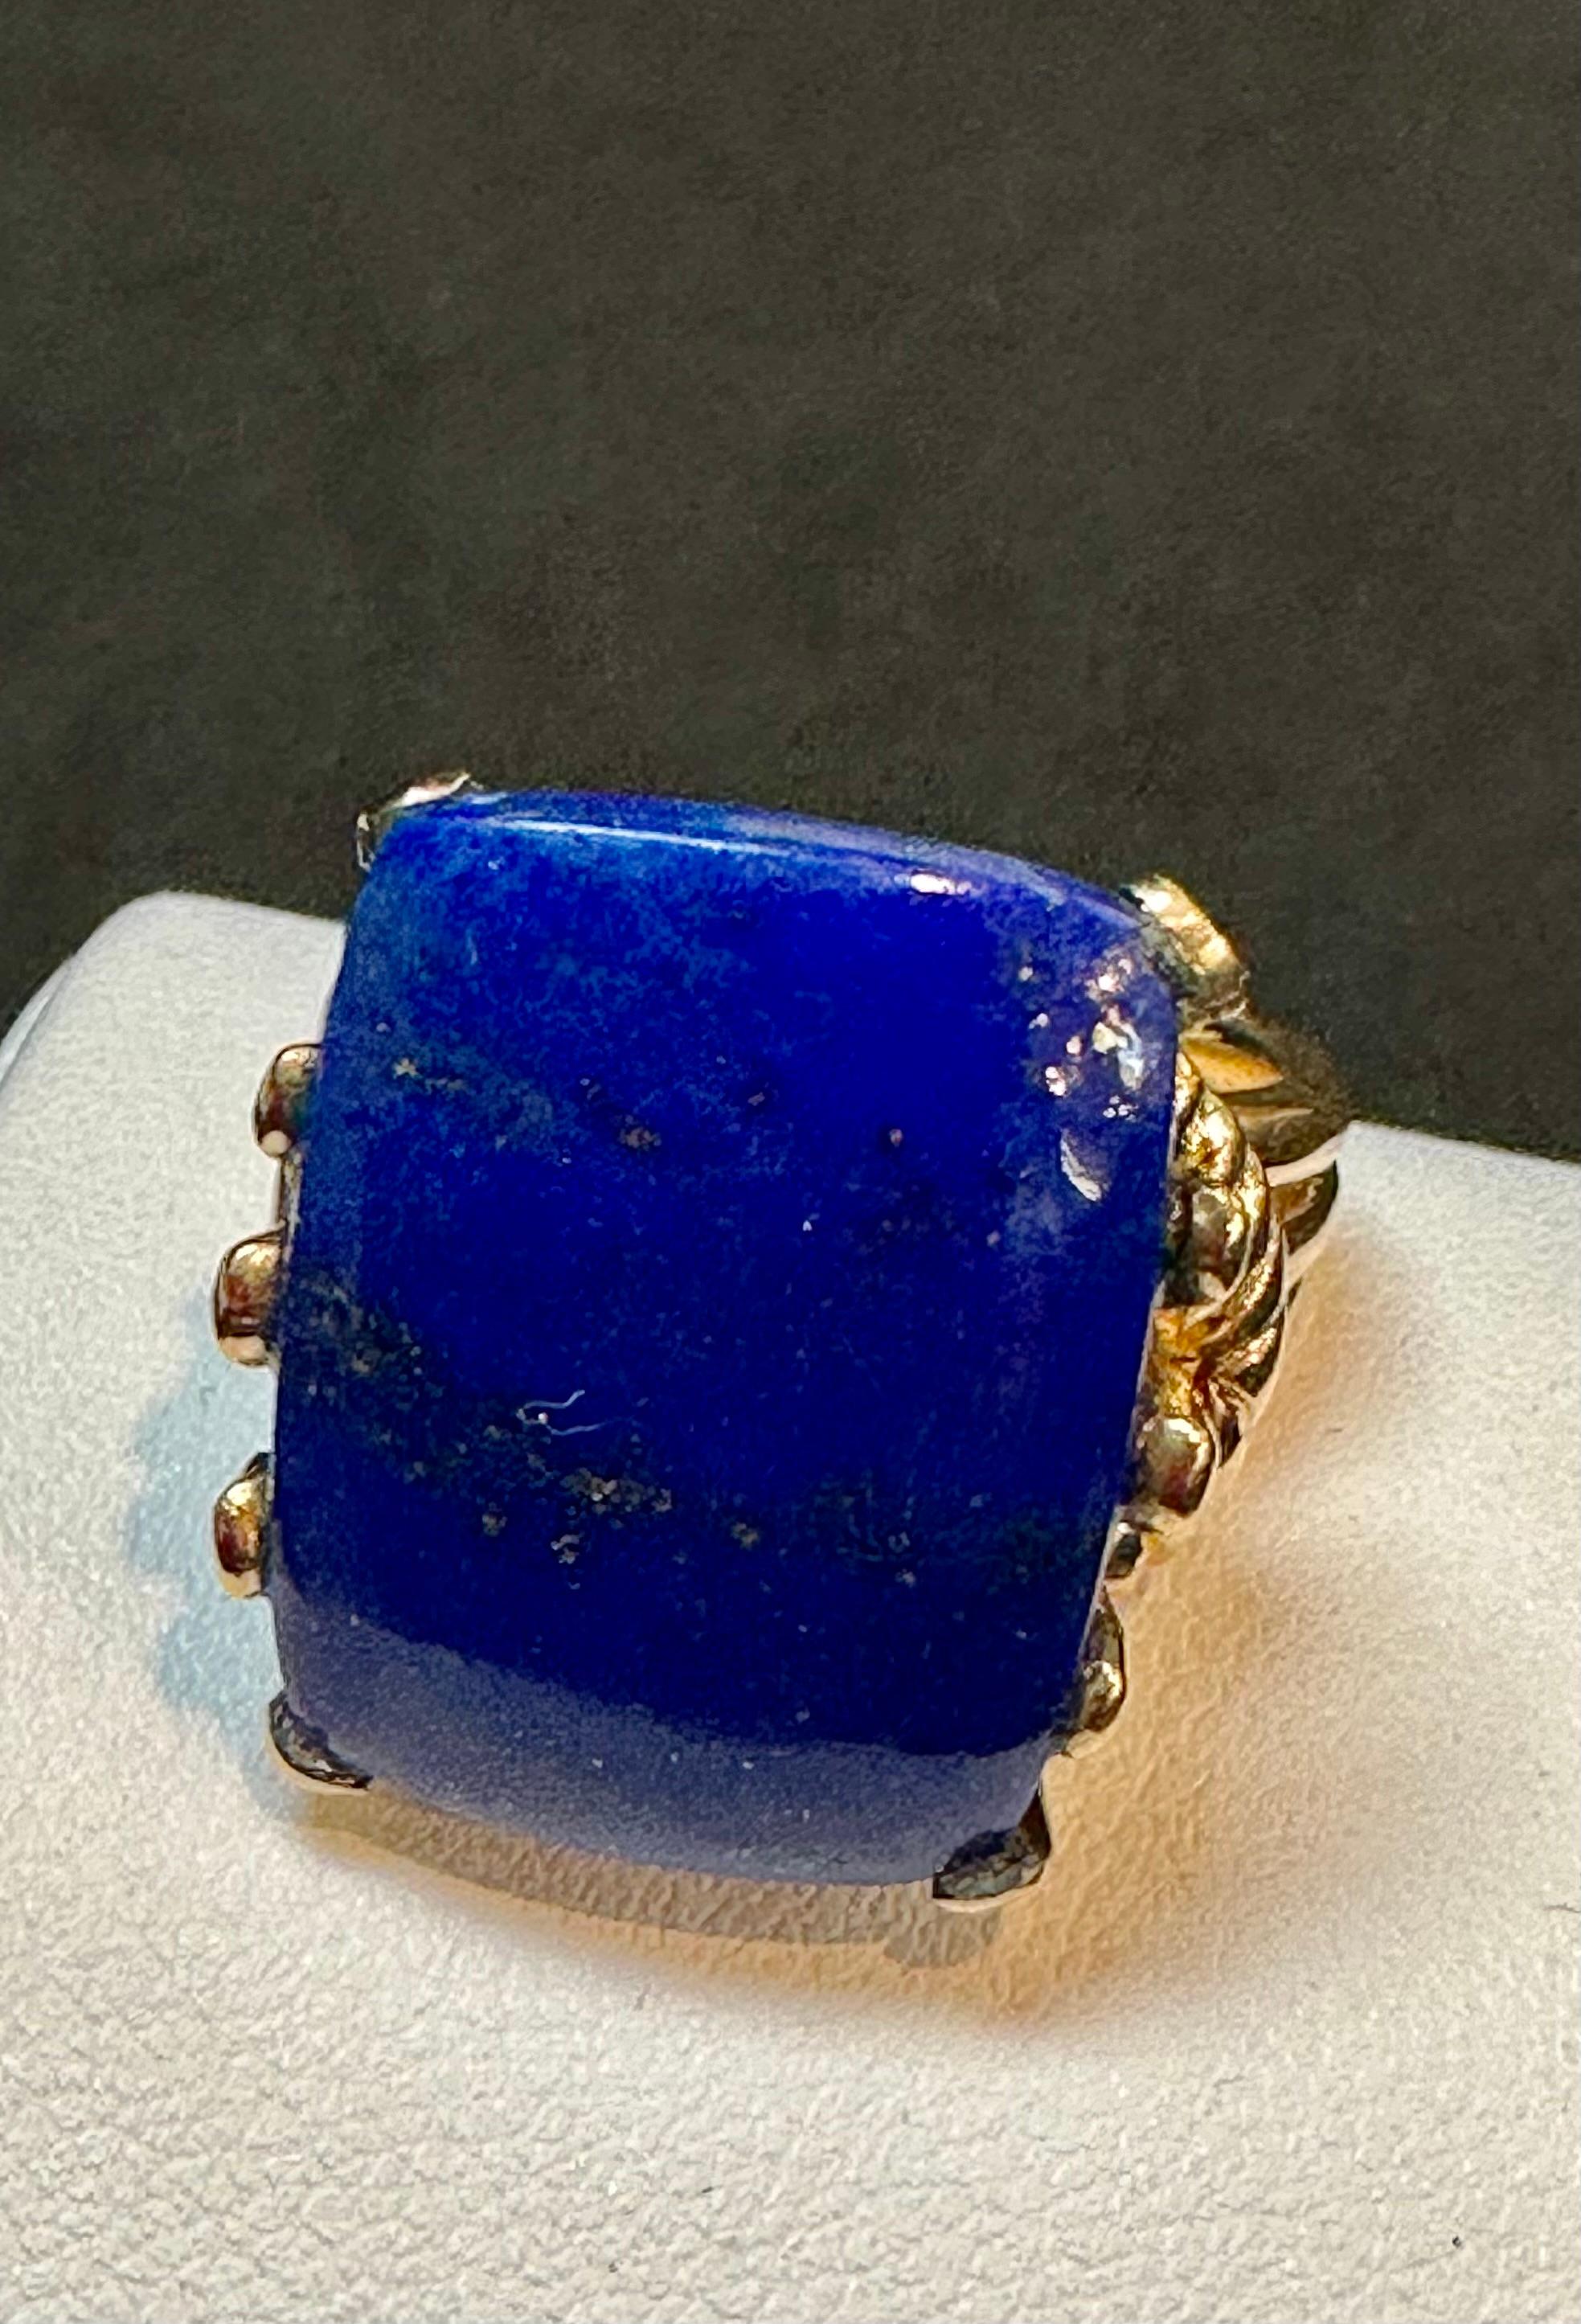 Women's 15 Ct Emerald cut Natural Lapis Lazuli Ring in 14 Kt Yellow Gold, Estate Size 7 For Sale